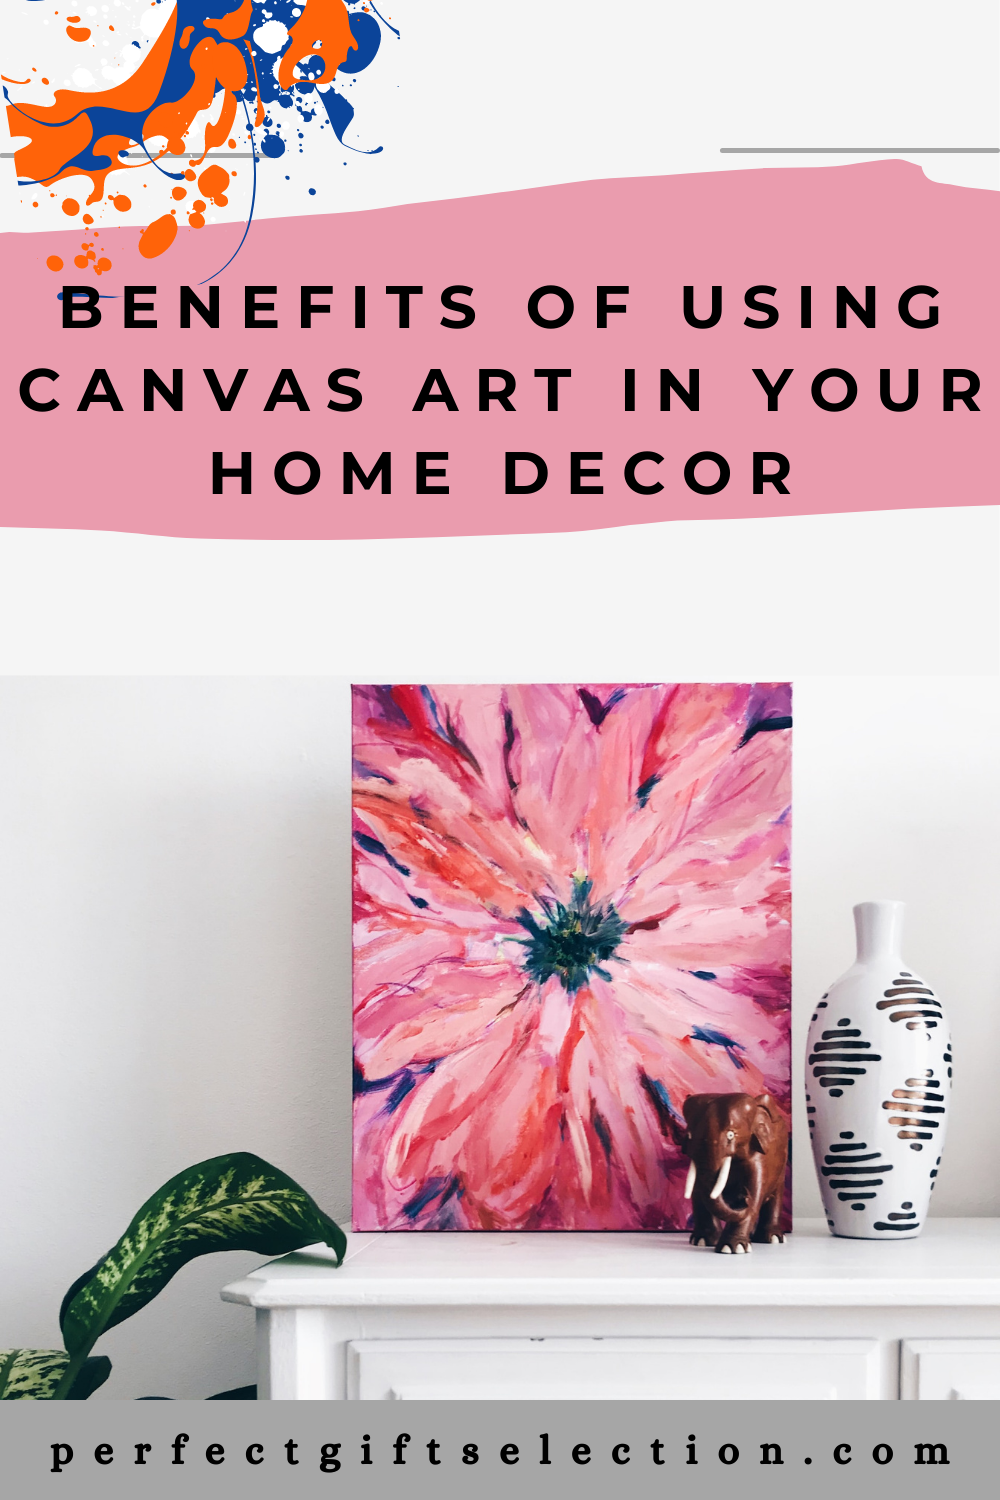 The Benefits of Using Canvas Art in Your Home Decor